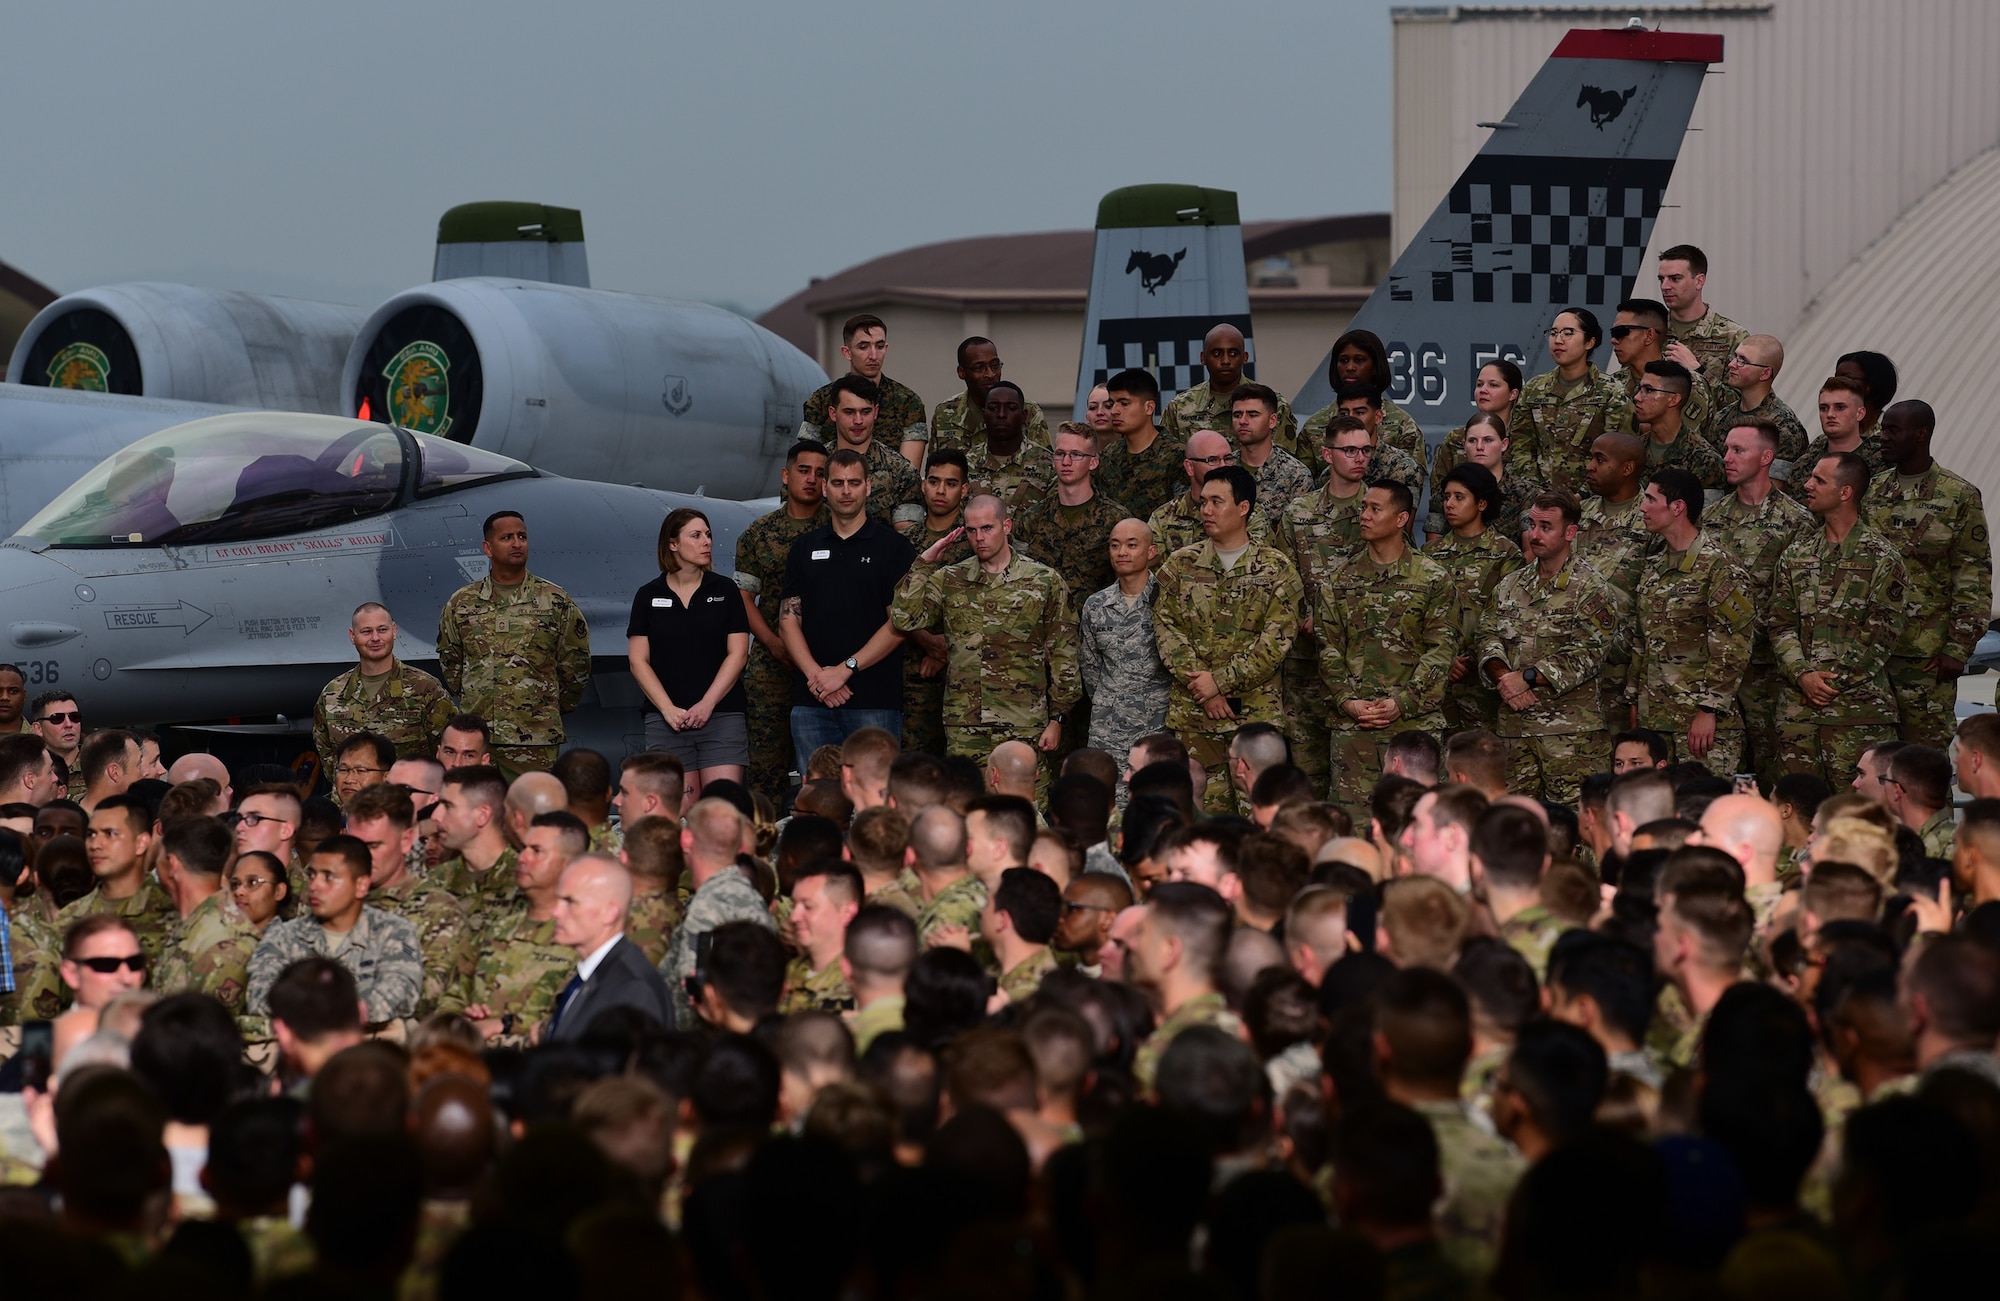 President Donald J. Trump addresses service members and their families during an event at Osan Air Base, Republic of Korea, June 30, 2019. U.S. Forces Korea supports a wide array of joint and combined operations giving service members regular training interactions with others services and multi-national forces. (U.S. Air Force photo by Staff Sgt. James L. Miller)